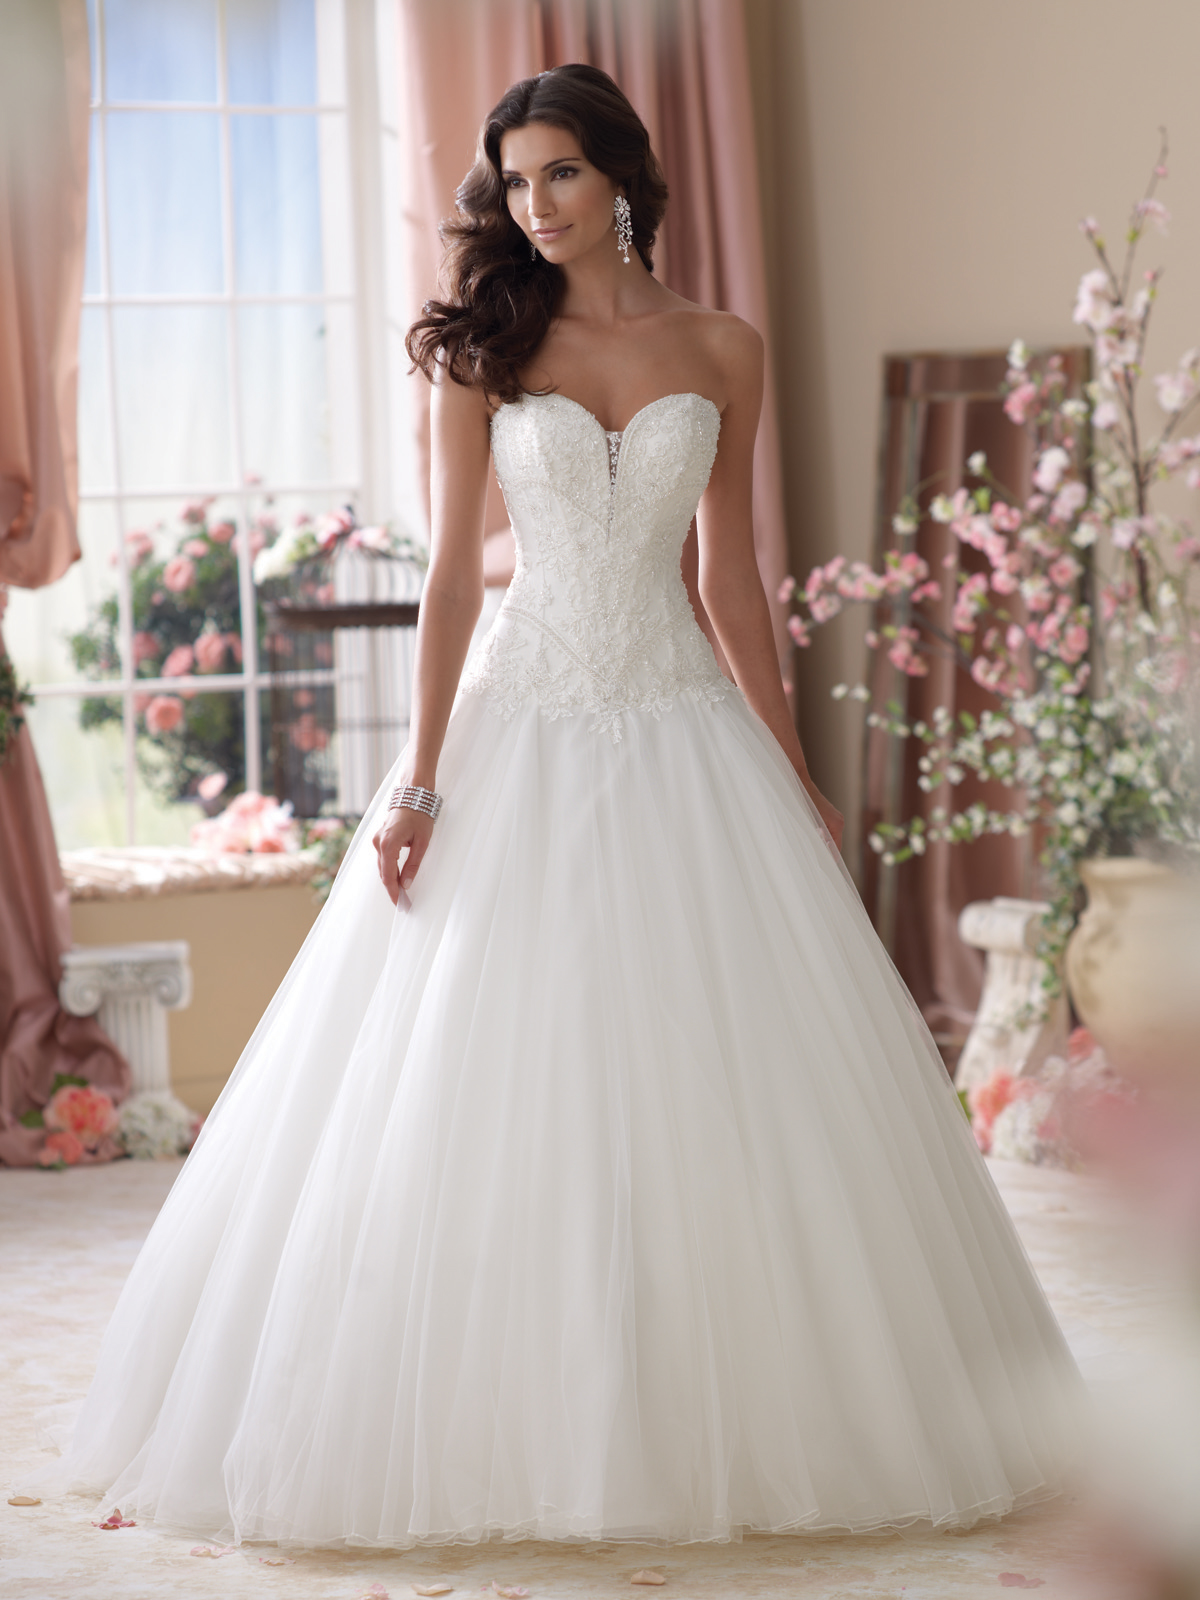 Awesome Bride Dresses